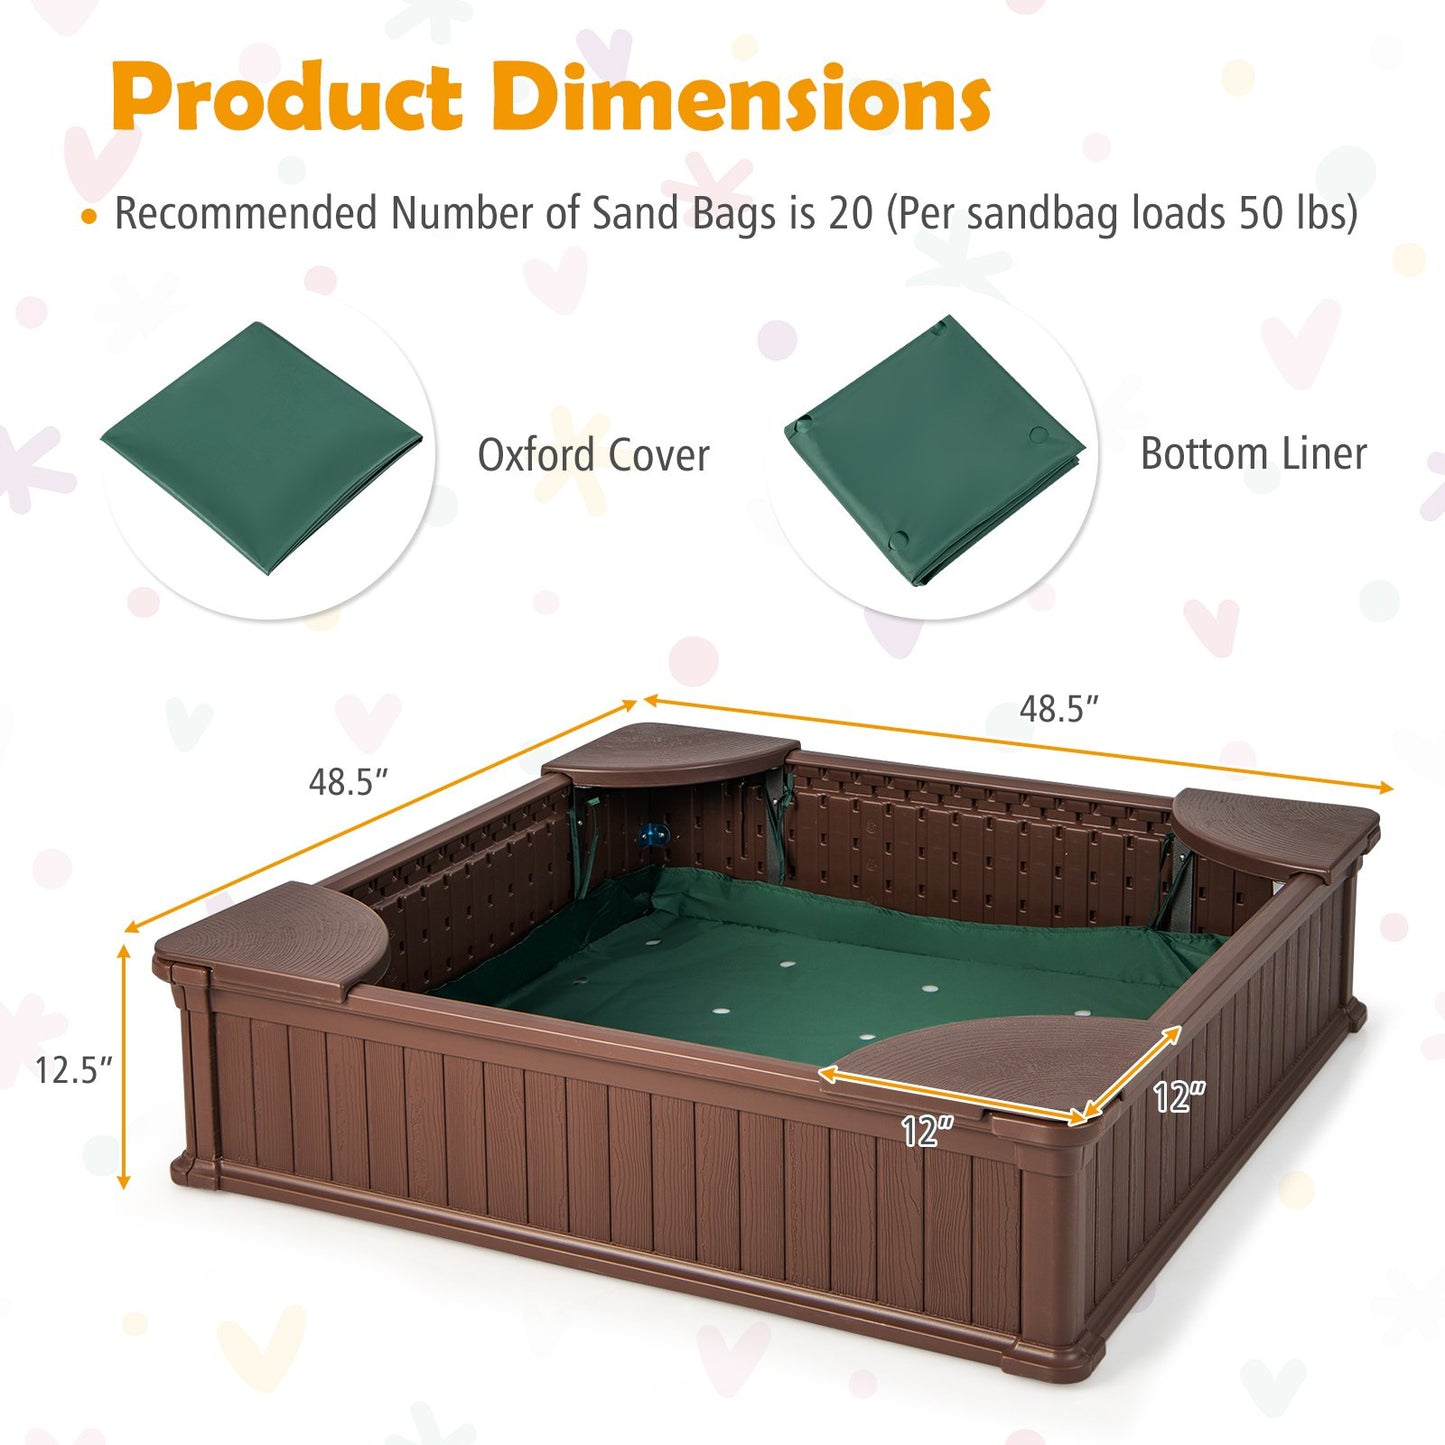 Kids Outdoor Sandbox with Oxford Cover and 4 Corner Seats, Brown